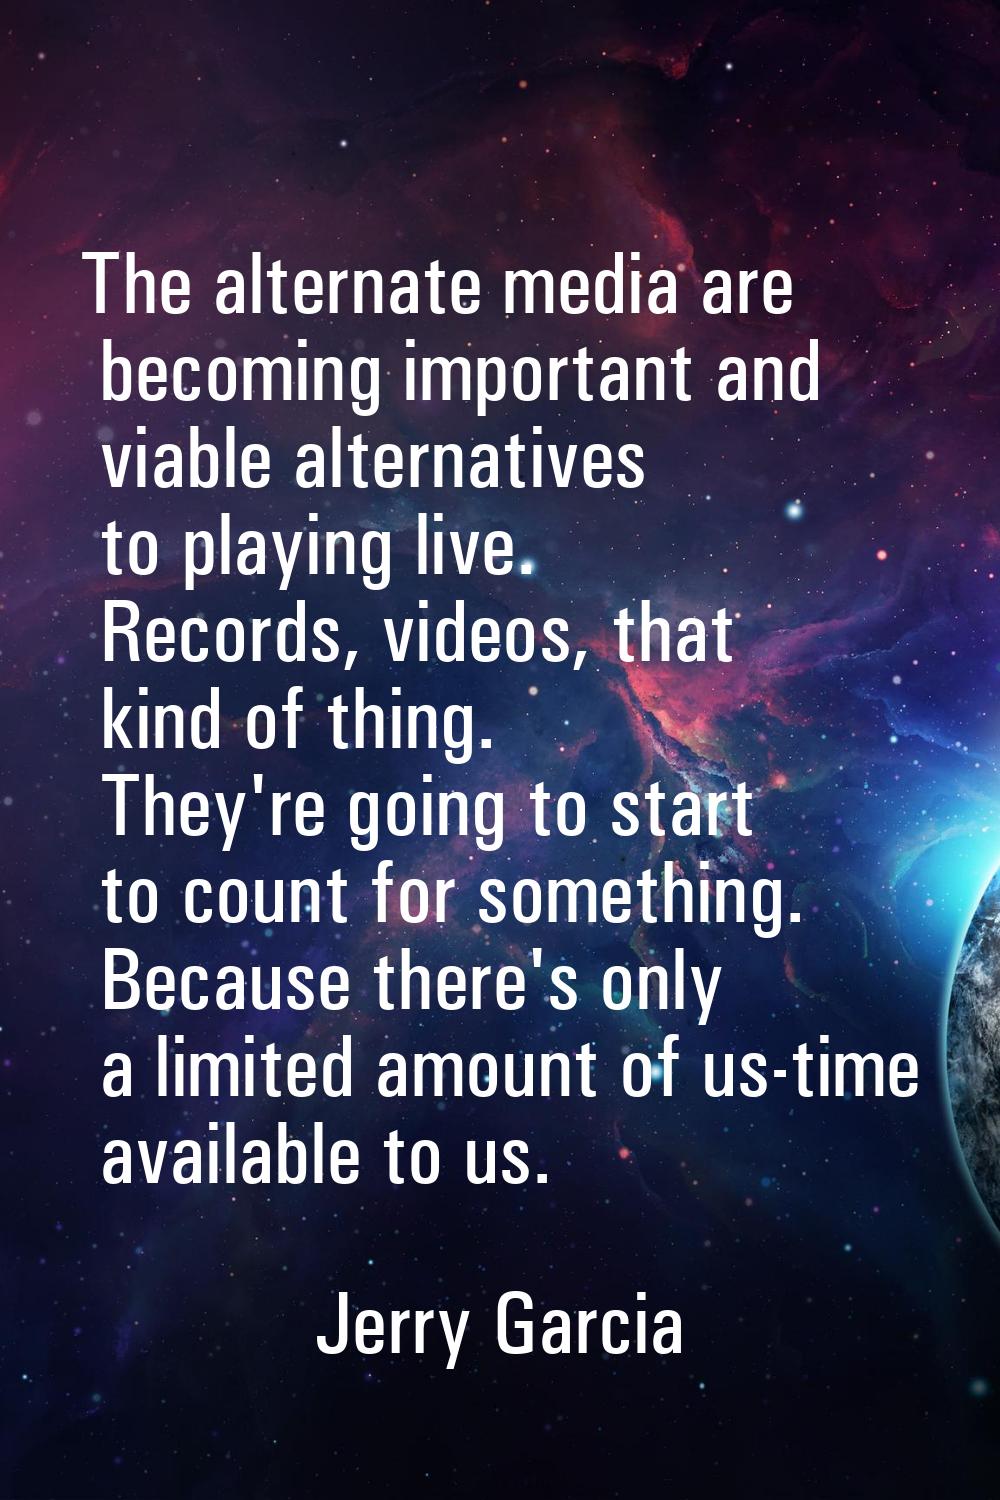 The alternate media are becoming important and viable alternatives to playing live. Records, videos